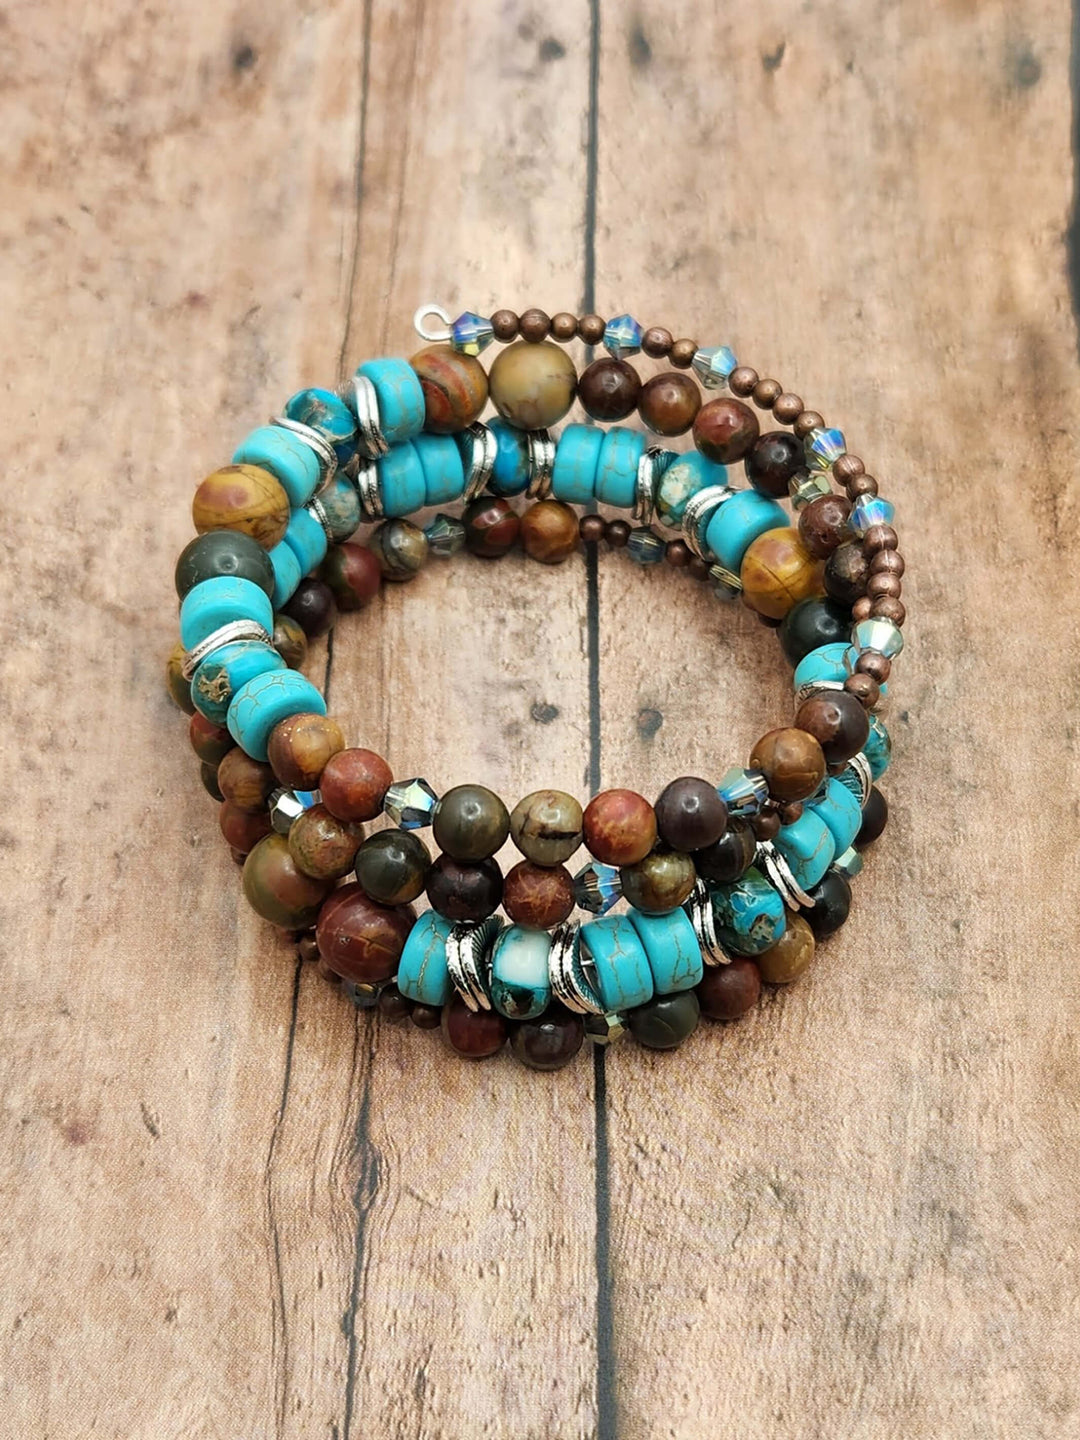 This photo of the Grand Canyon Memory Wire Bracelet shows the many shapes, sizes and textures with blue, brown, tan, and green beads that makeup this bracelet.